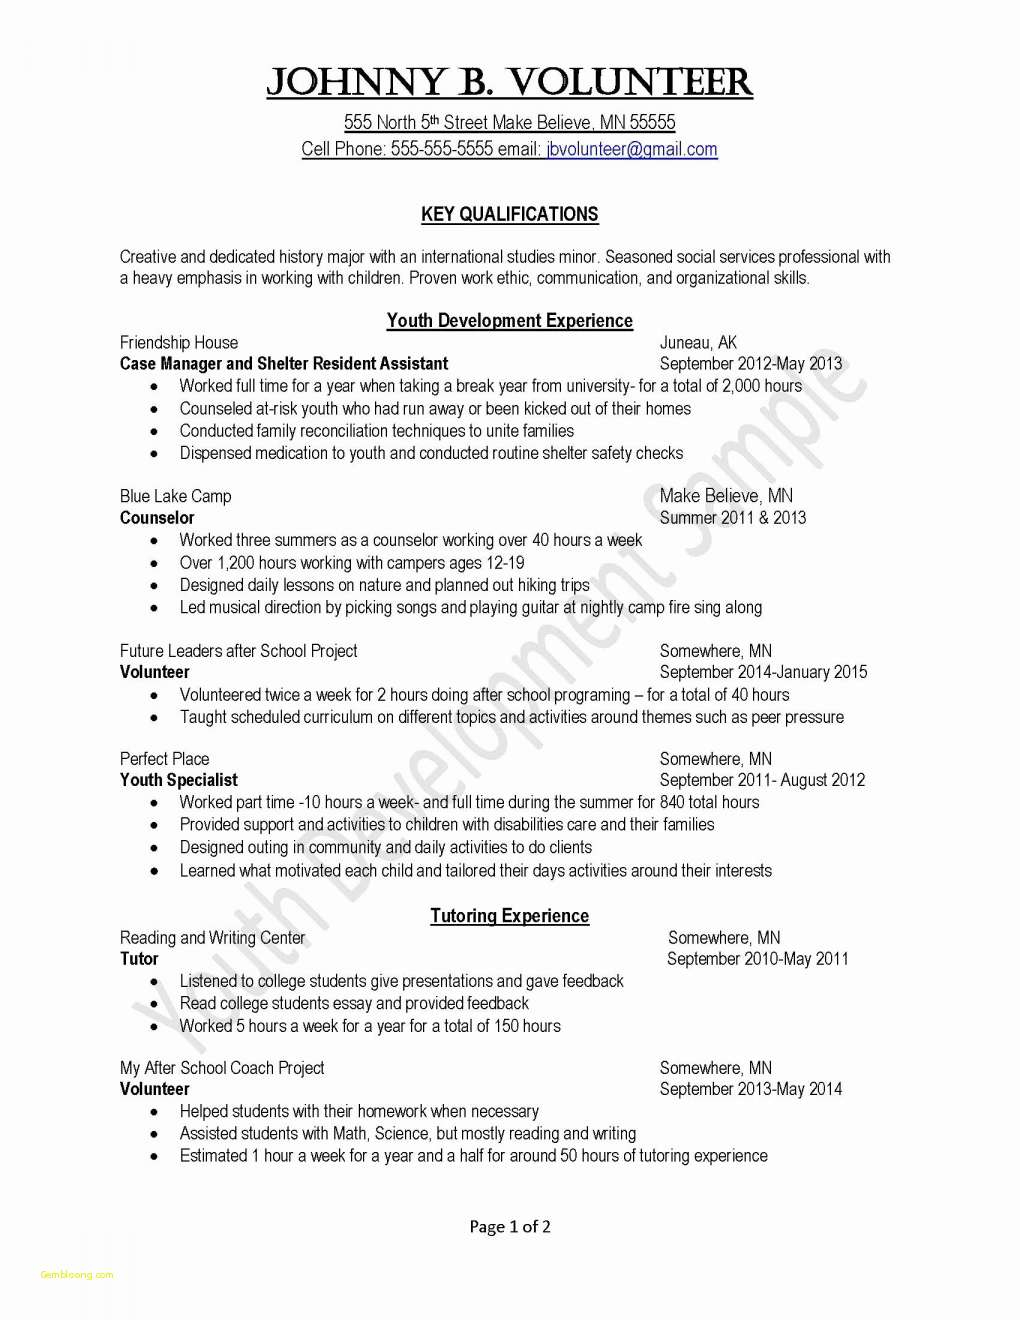 Professional Resume and Cover Letter Template - Free Resume Templates for Students Takenosumi